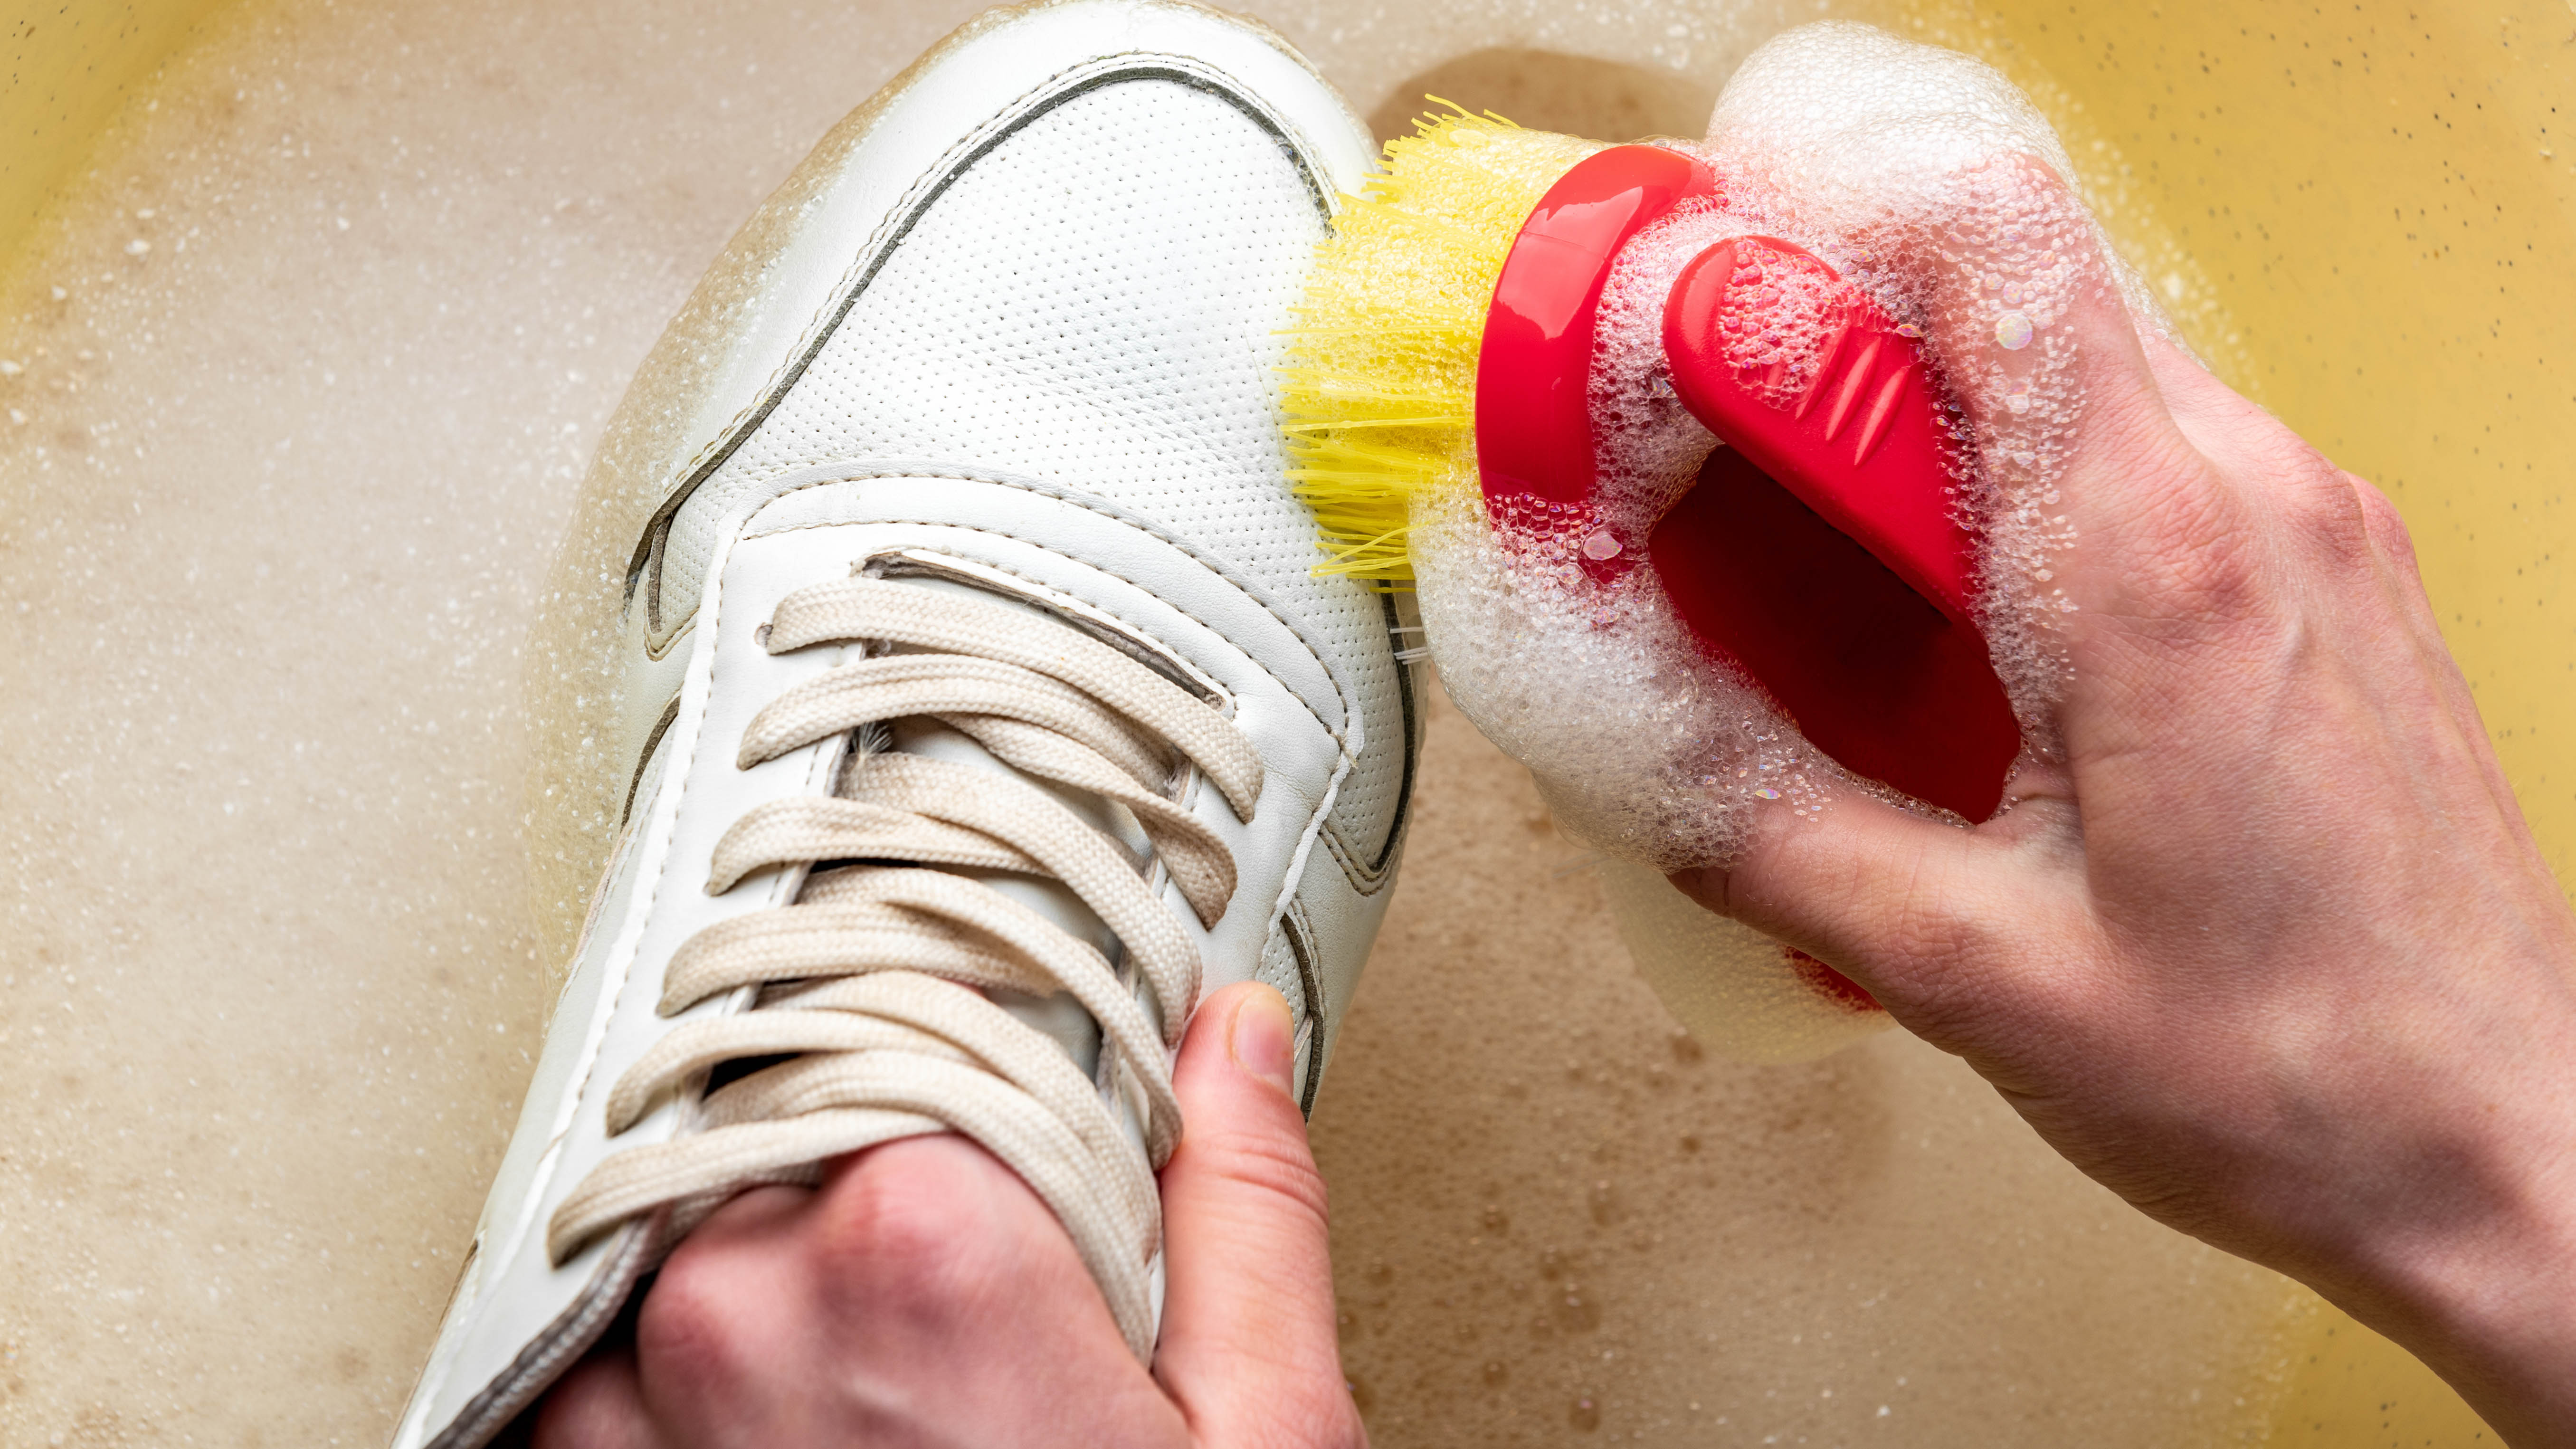 Cleaning sneakers in soapy water